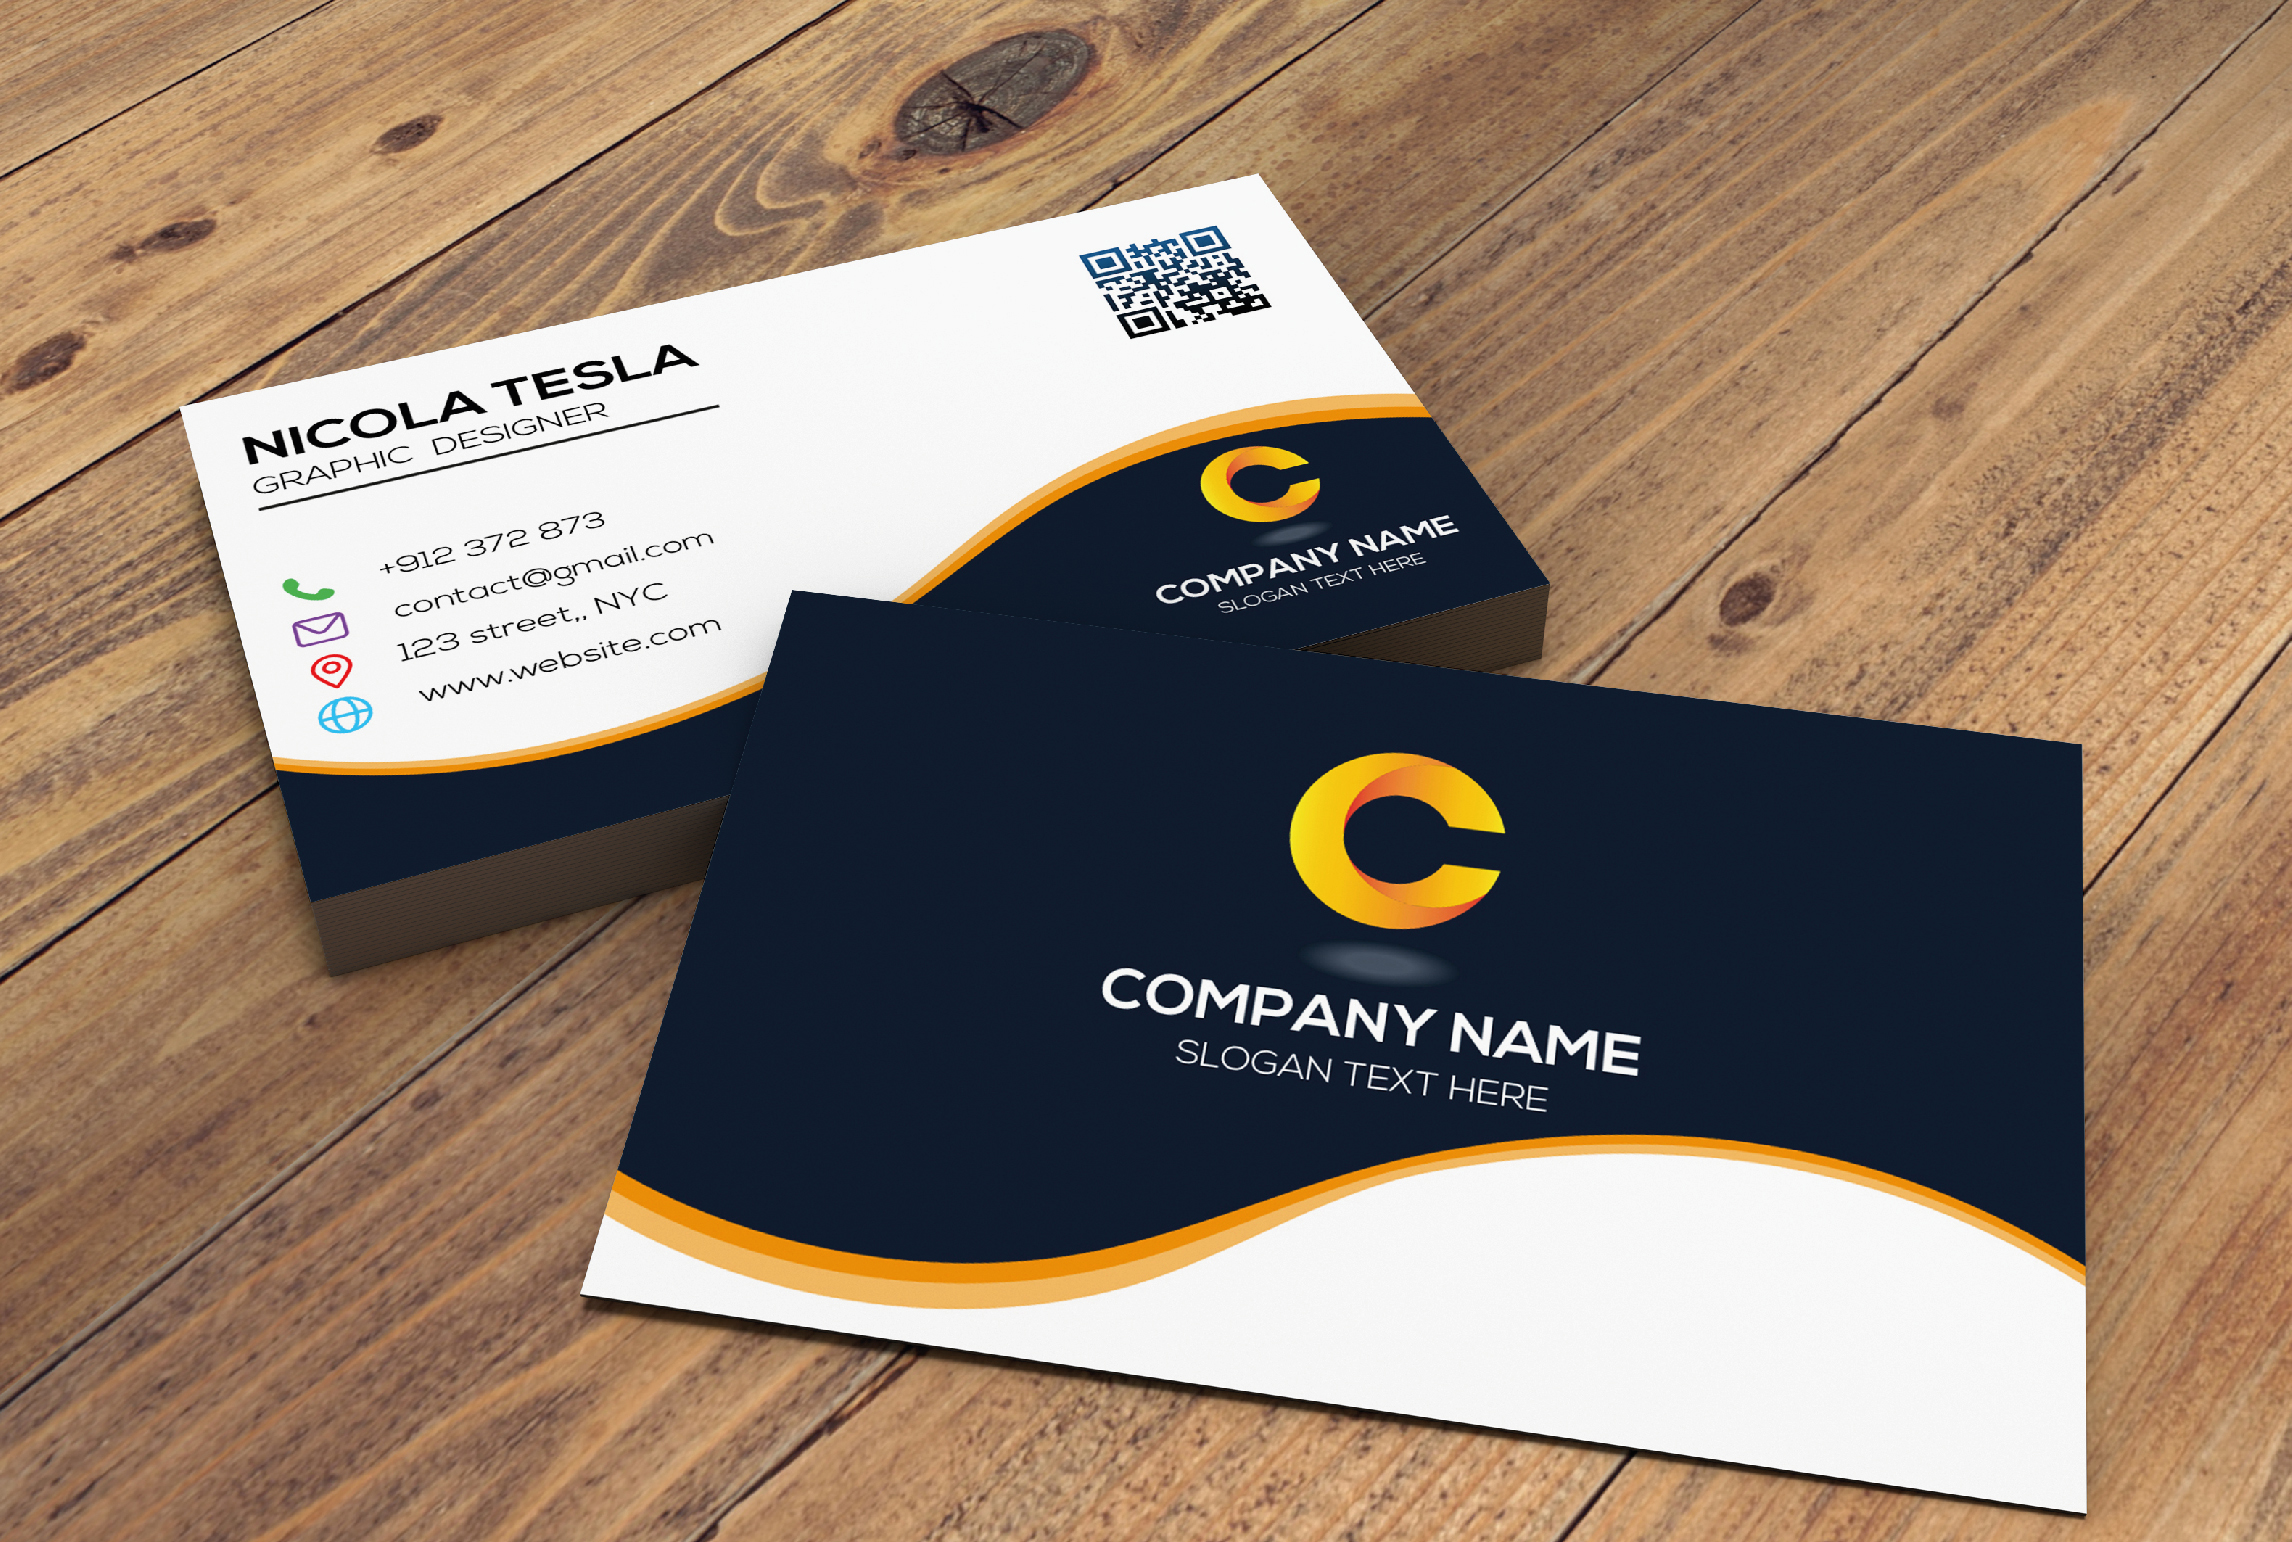 I will Create business card with two concepts